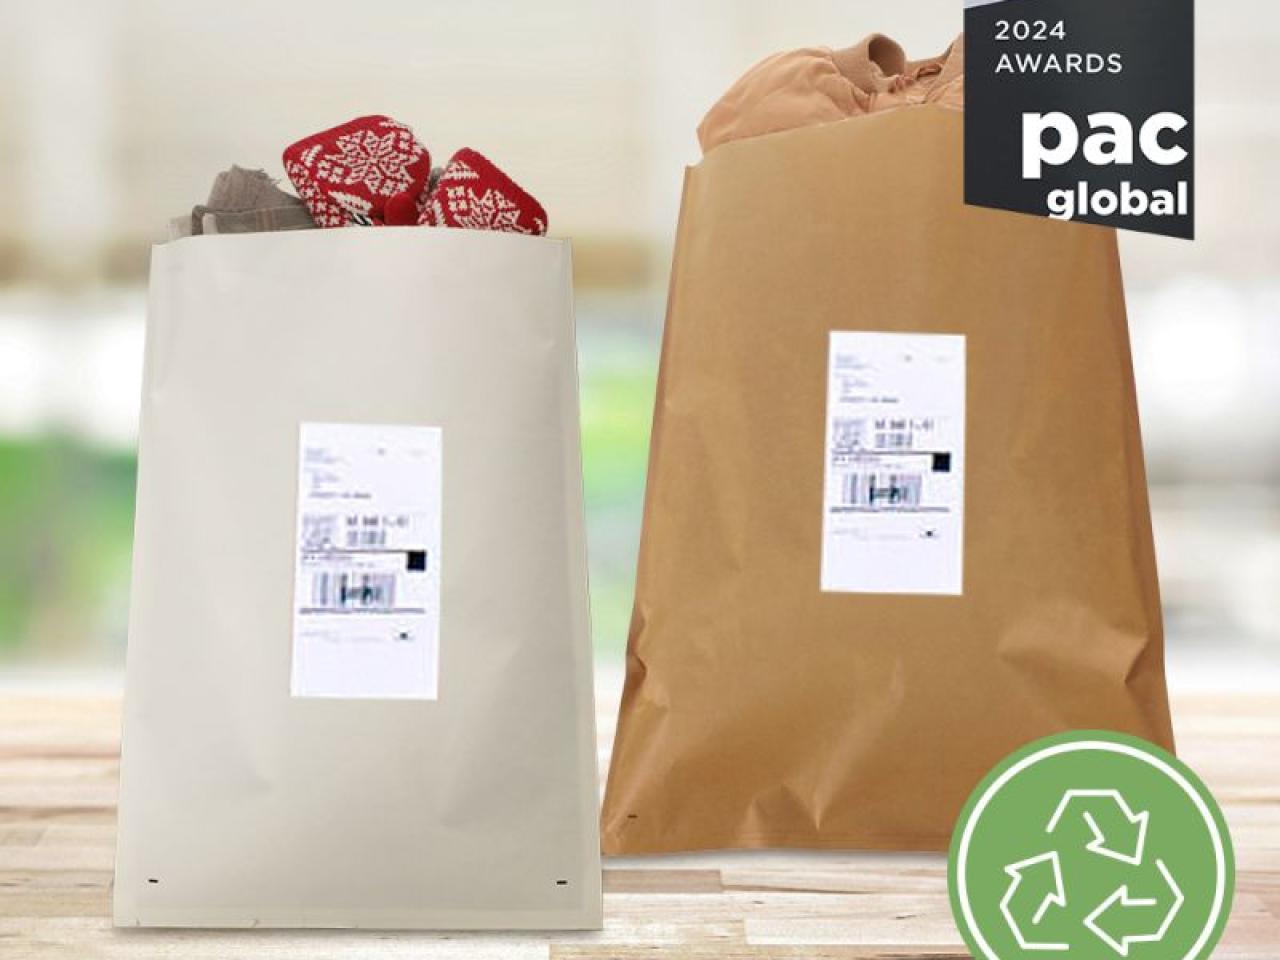 Two shipping bags with items inside on a flat wooden surface. SEE and Autobag logos. "Best in Class 2024 Awards pac Global" badge and recycling symbol in the corner.